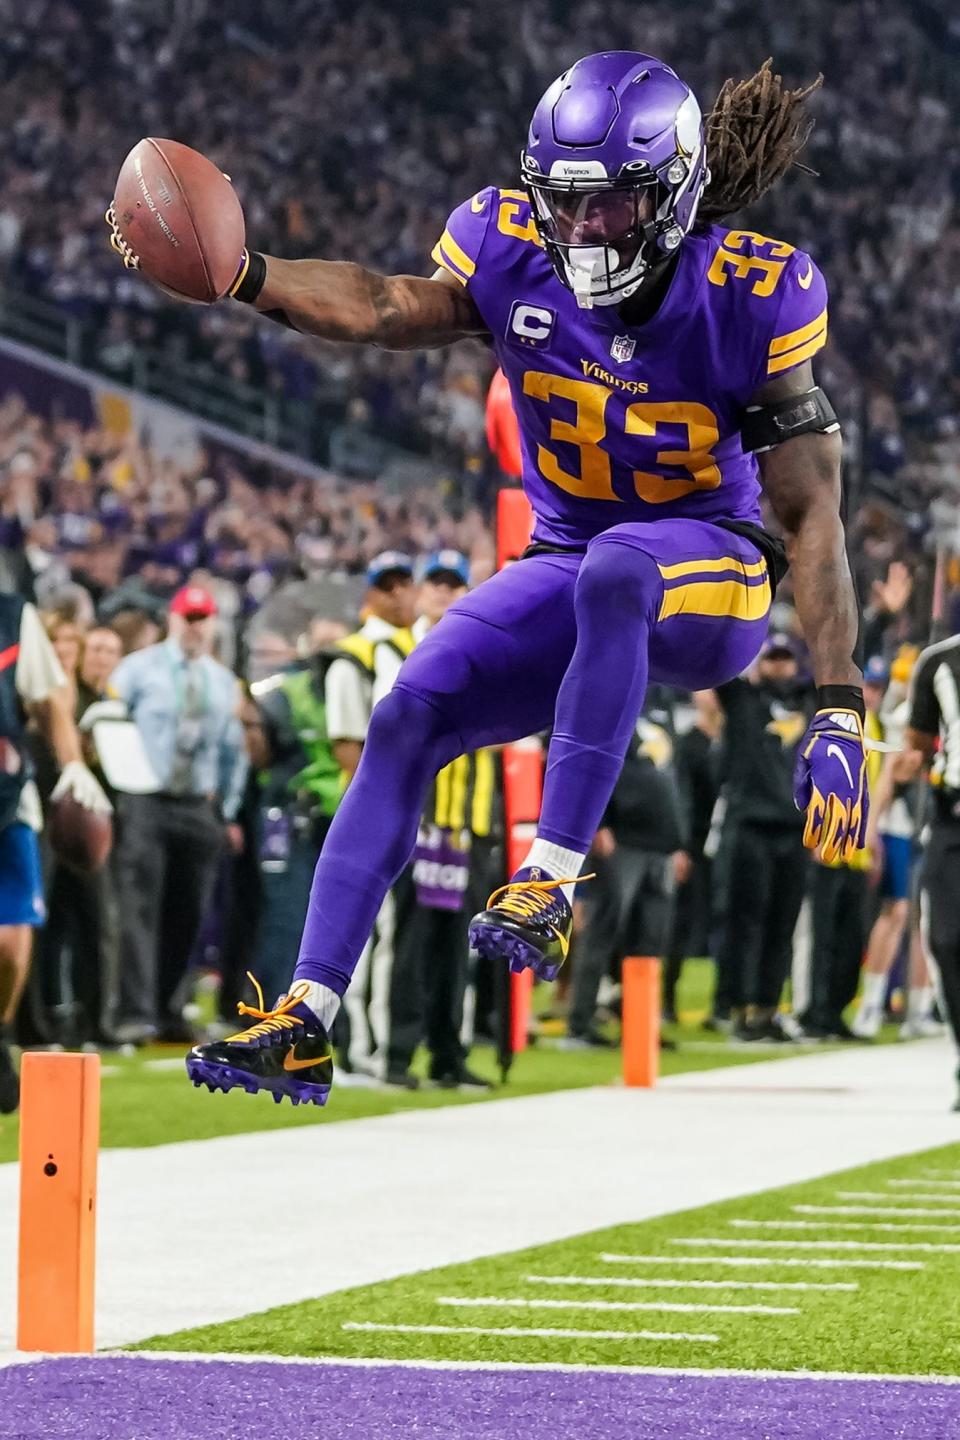 Will Dalvin Cook and the Minnesota Vikings run past the Chicago Bears in Week 15 of the NFL season?